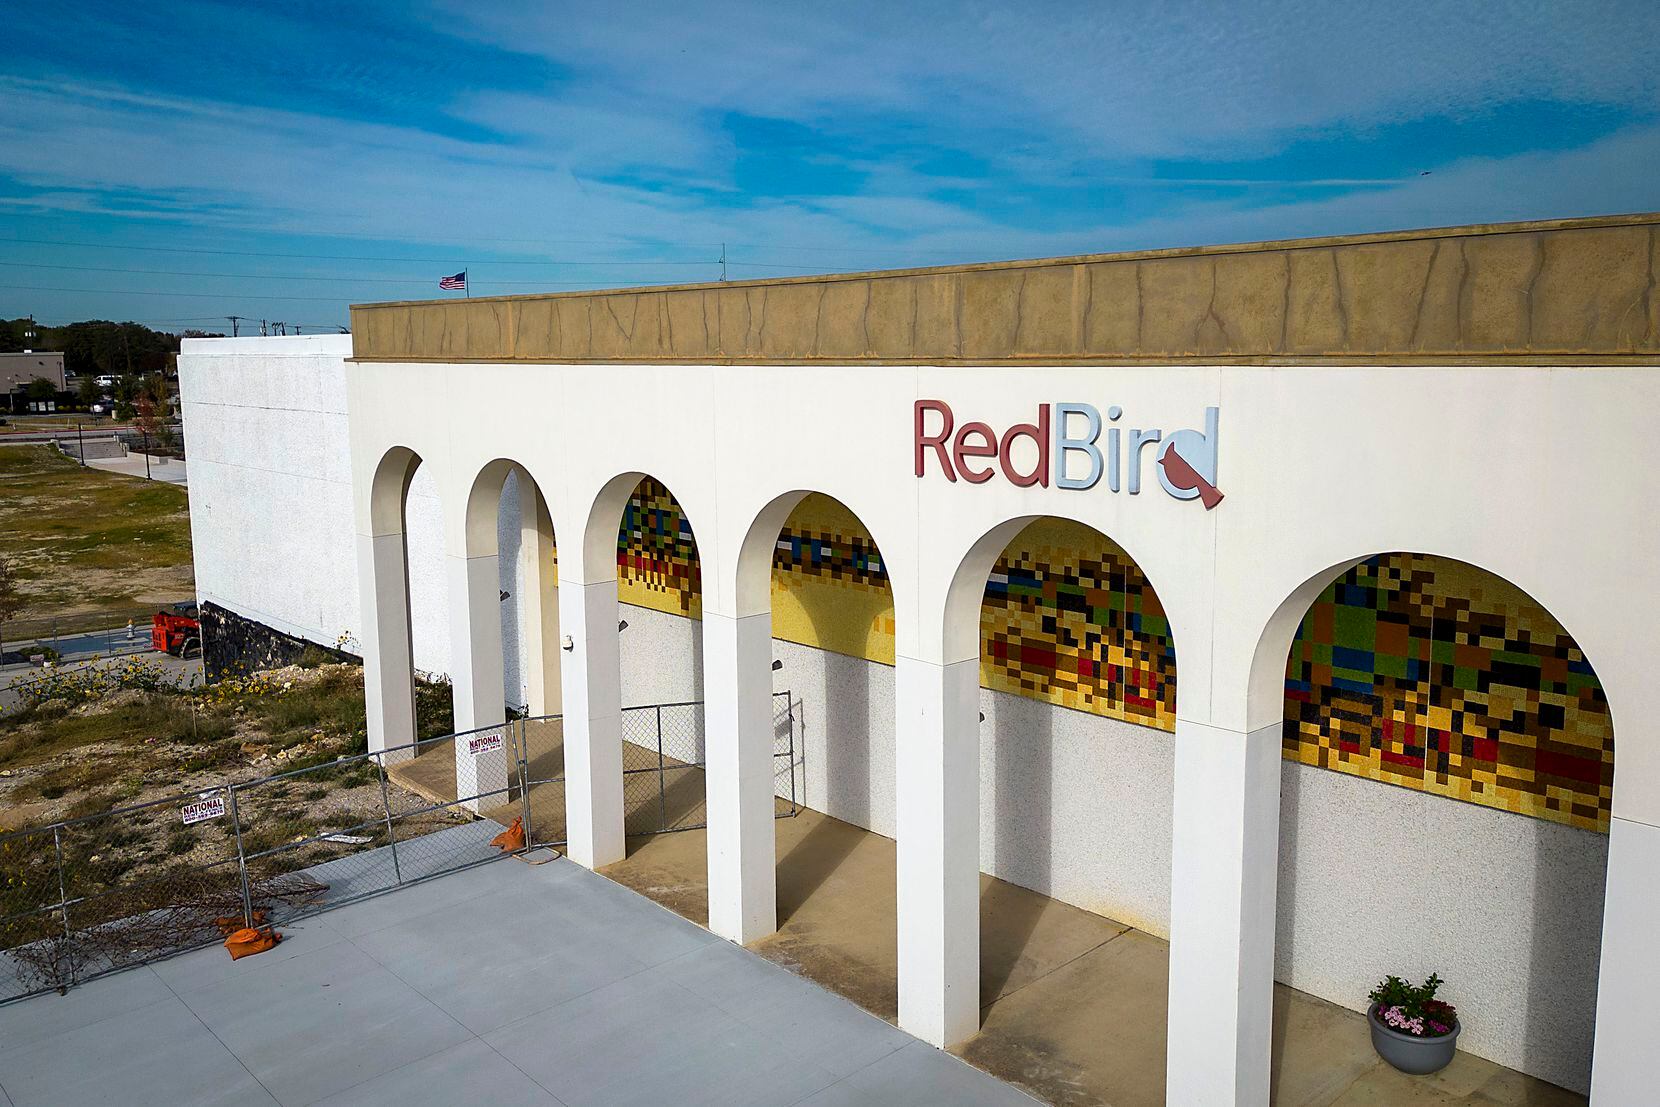 The RedBird development is on the site of the former Red Bird Mall on Interstate 20 in...